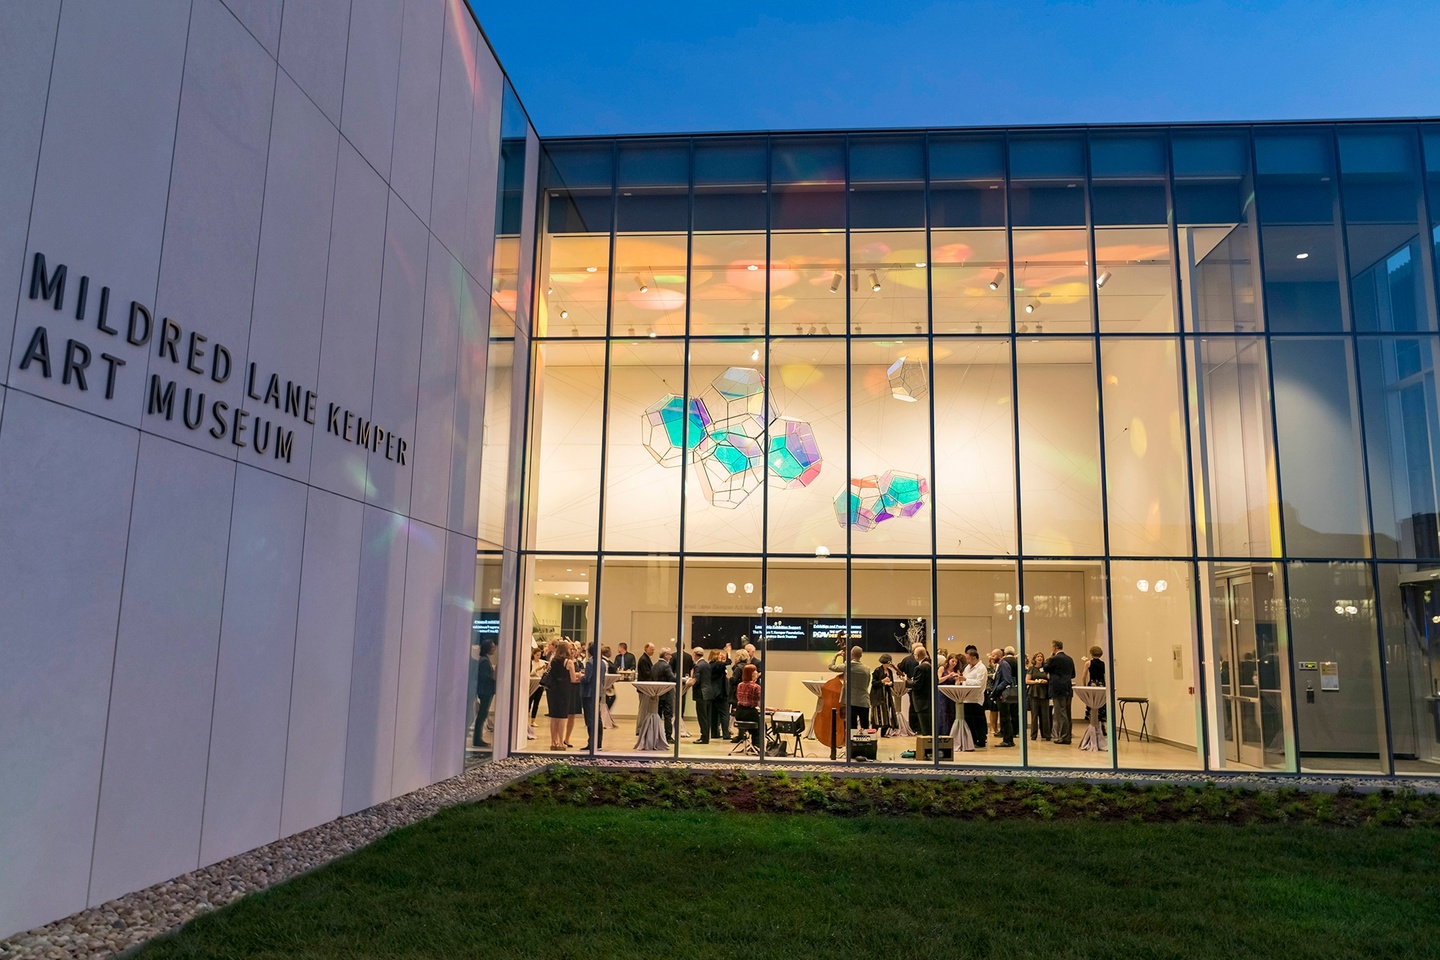 Exterior of the Mildred Lane Kemper Art Museum at night, with lights on and people gathered visible through the large wall of windows